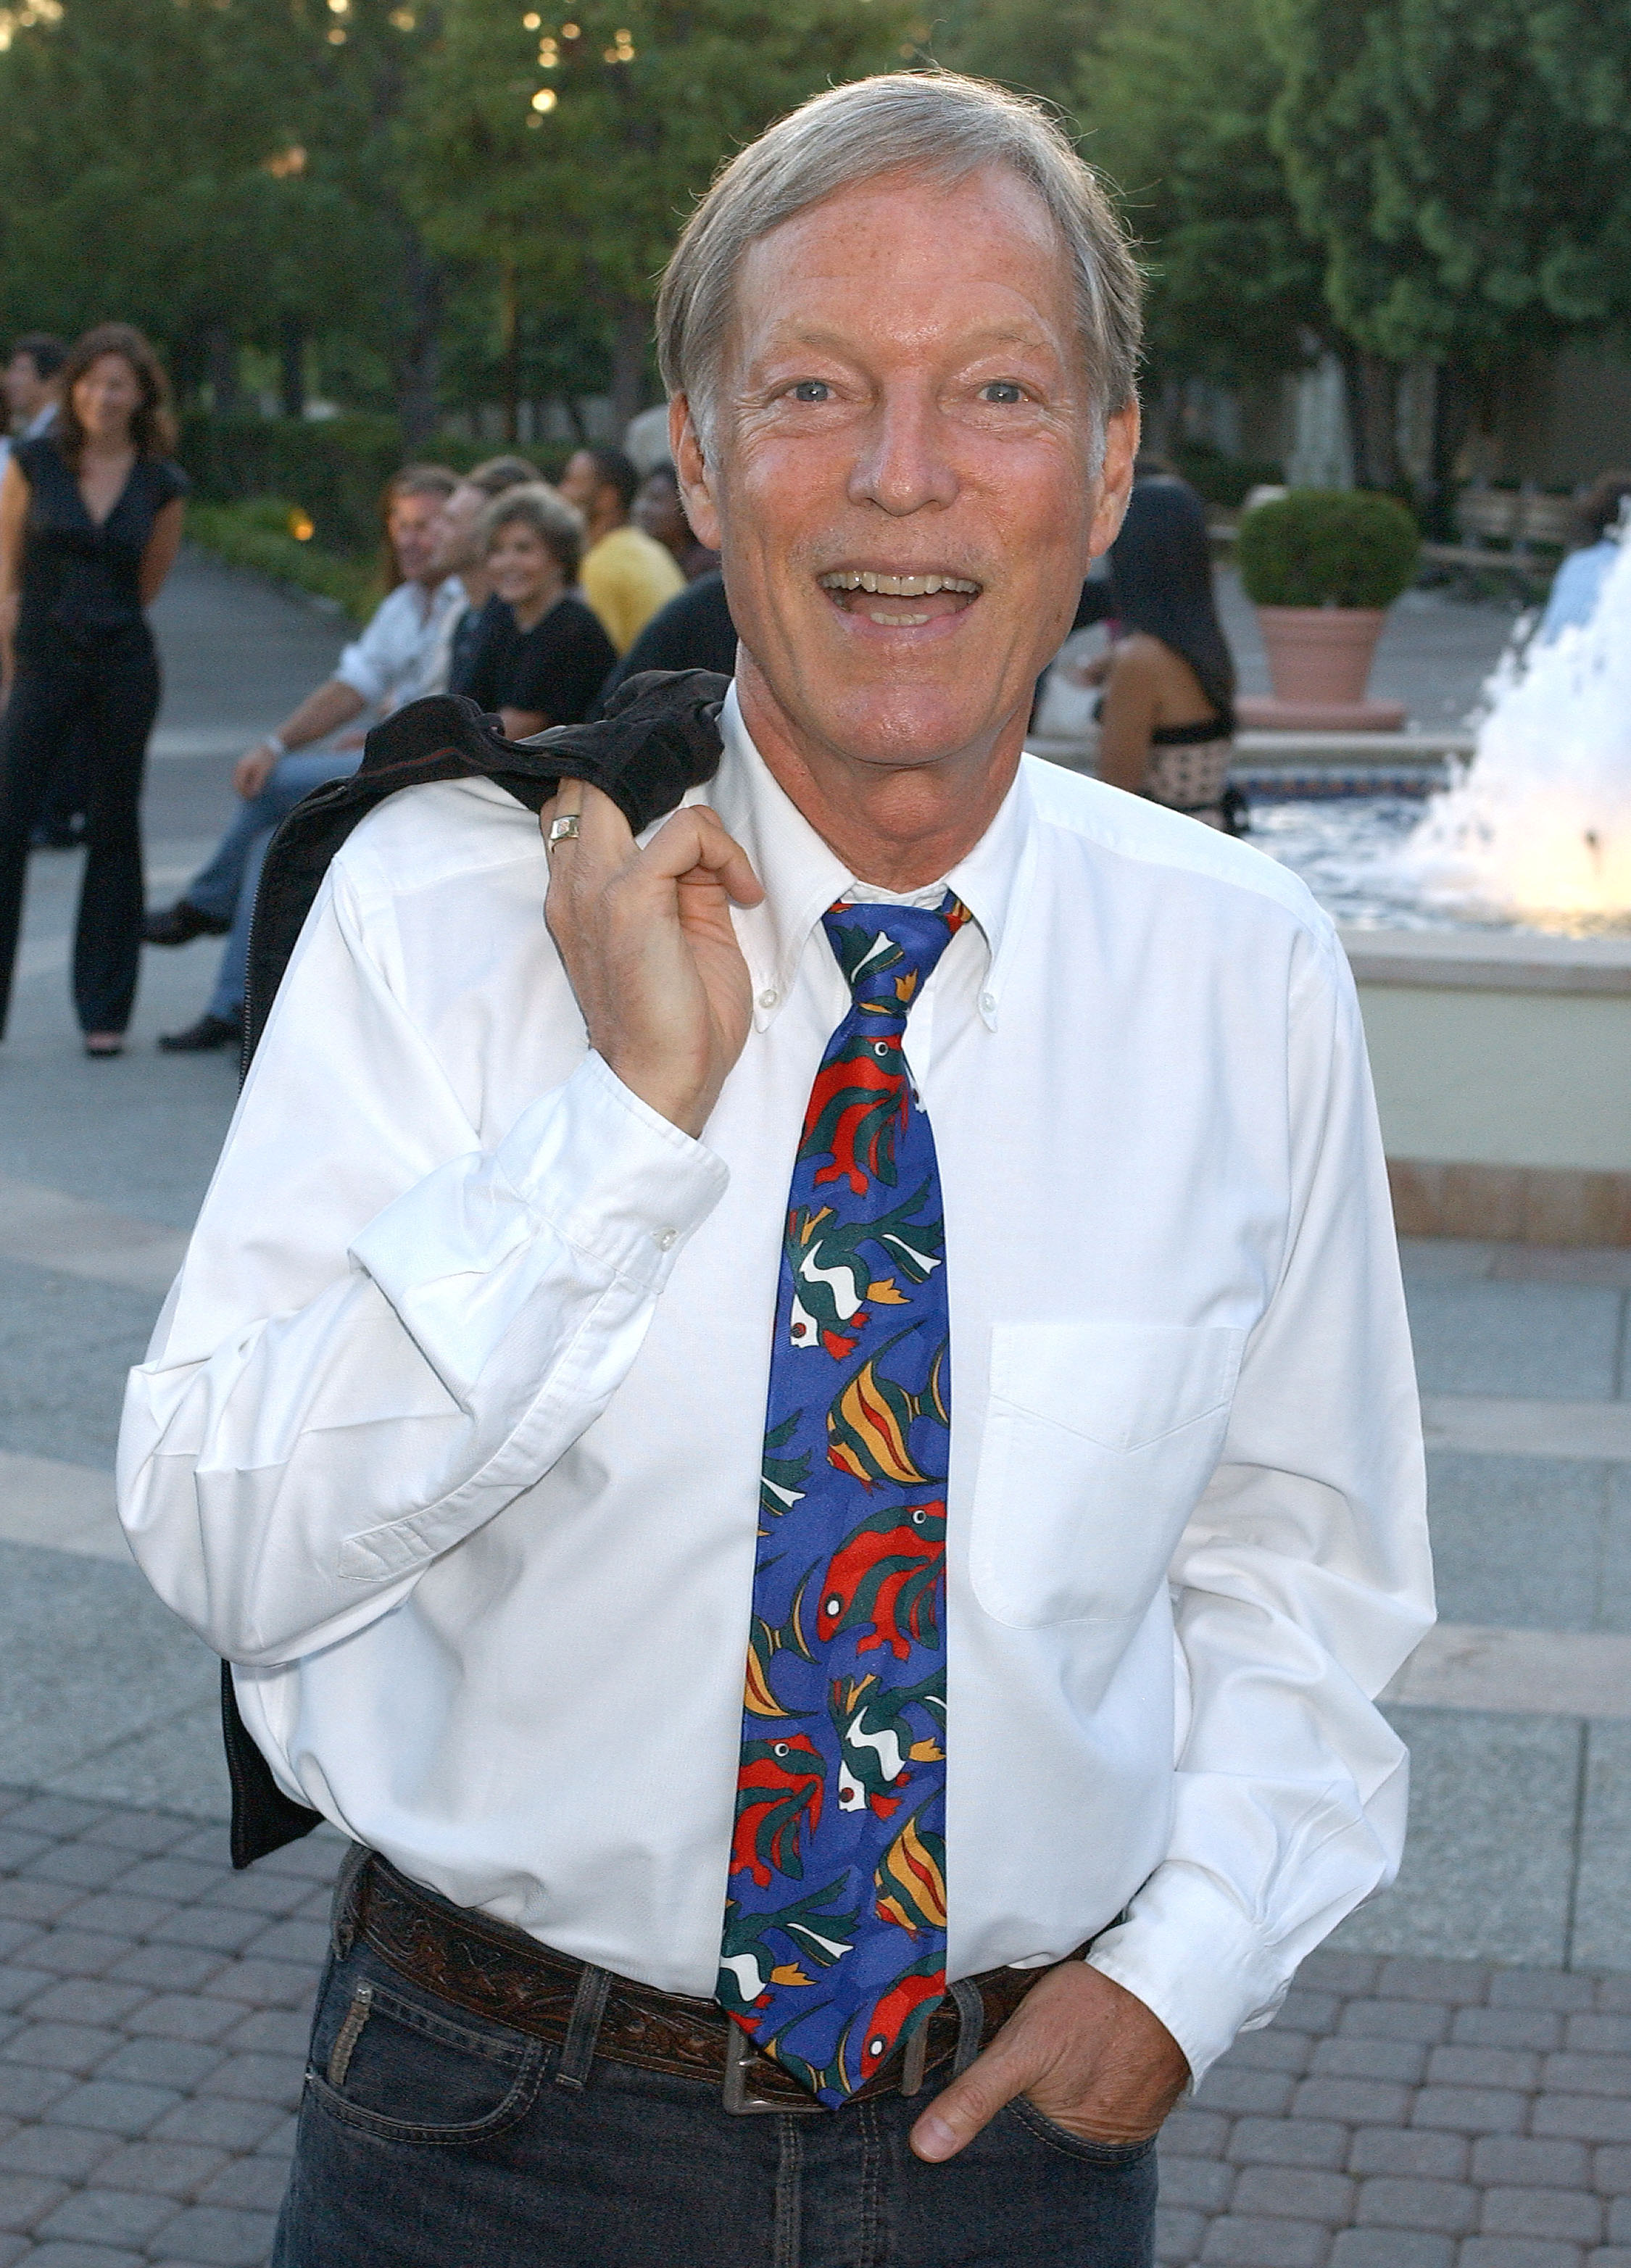 Richard Chamberlain during the season four premiere screening of "Nip/Tuck" in Hollywood, California, on August 25, 2006 | Source: Getty Images